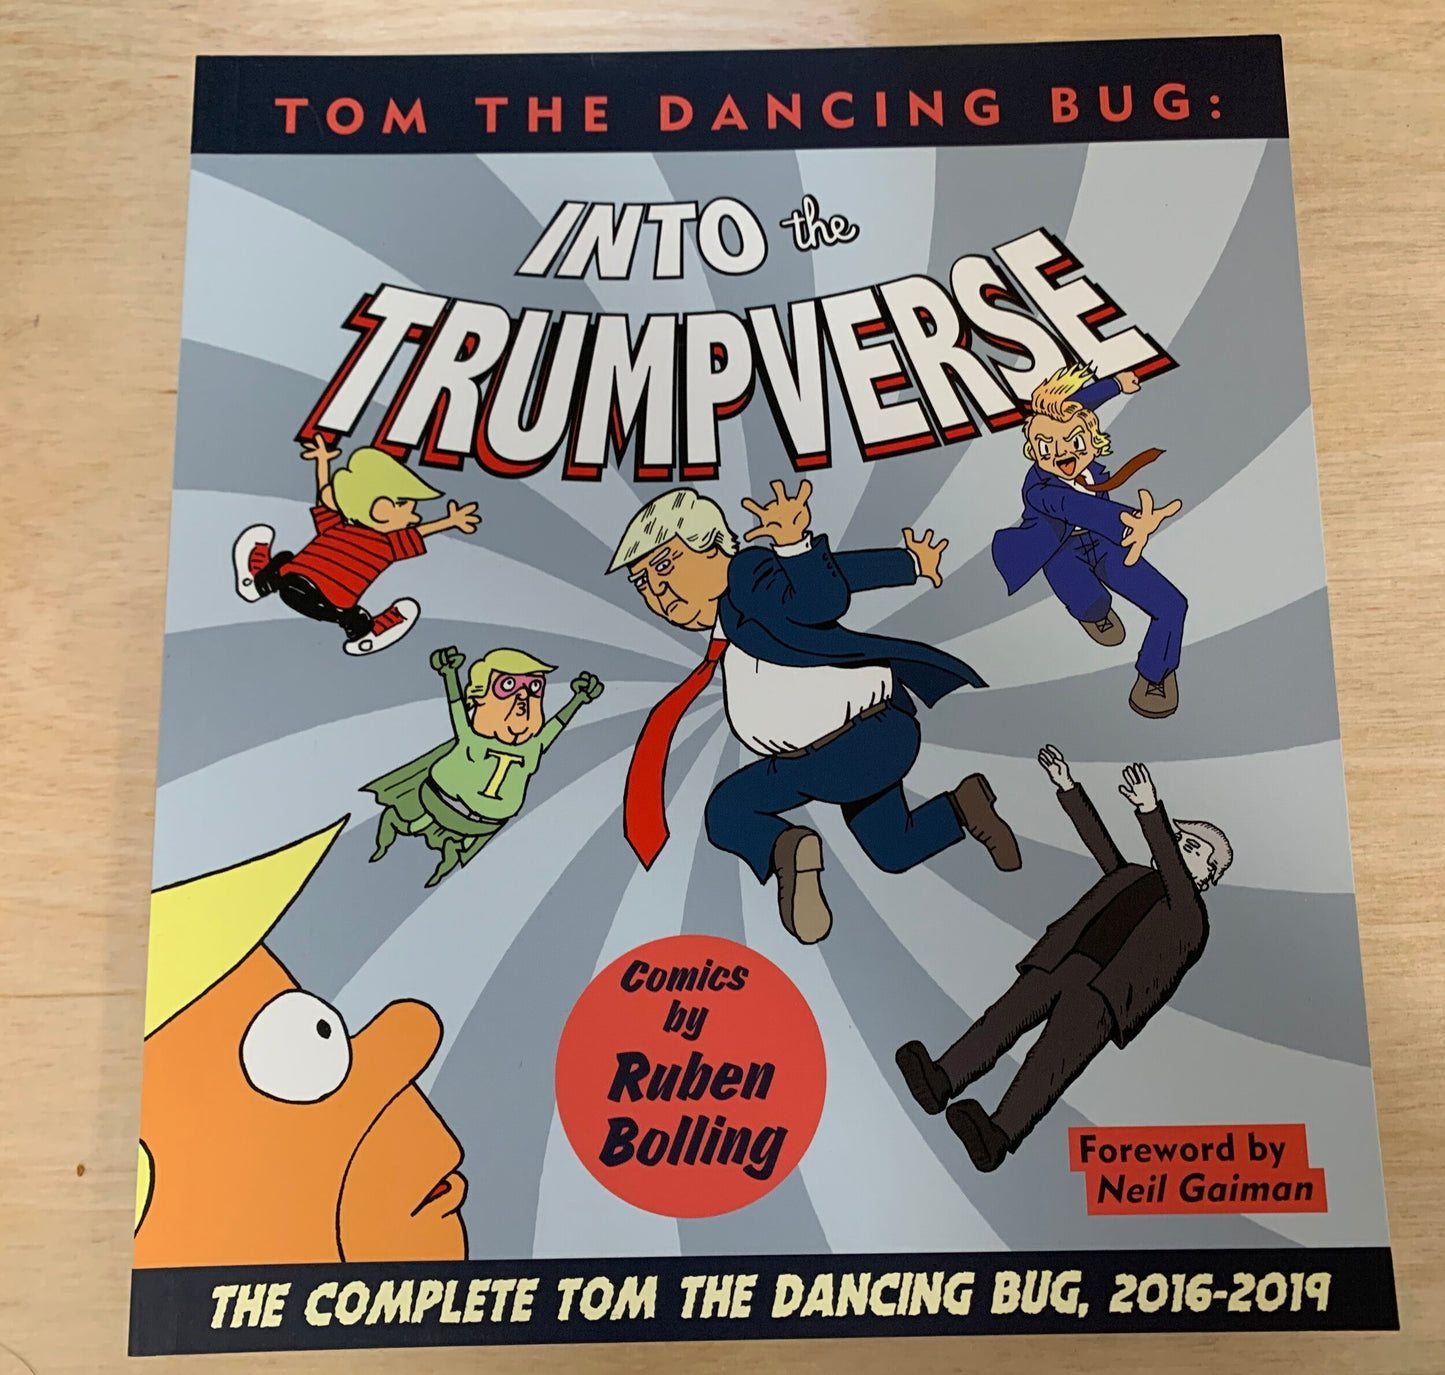 Tom the Dancing Bug: Into the Trumpverse